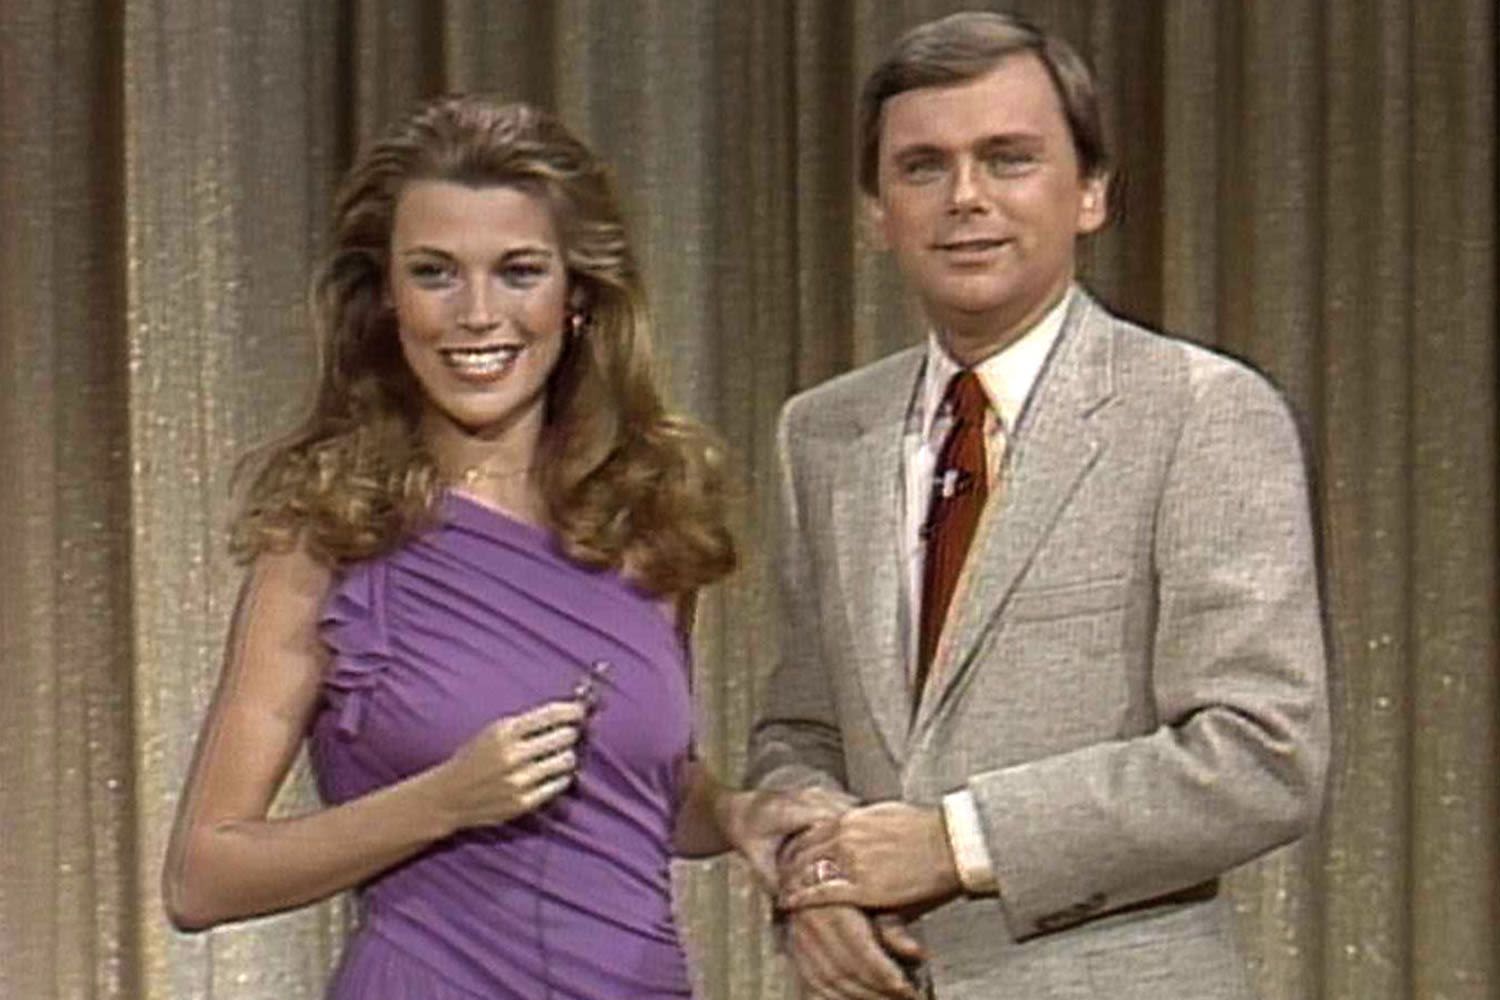 Pat Sajak Was Not the Original “Wheel of Fortune” Host — and 8 Other Wild Facts as He Retires